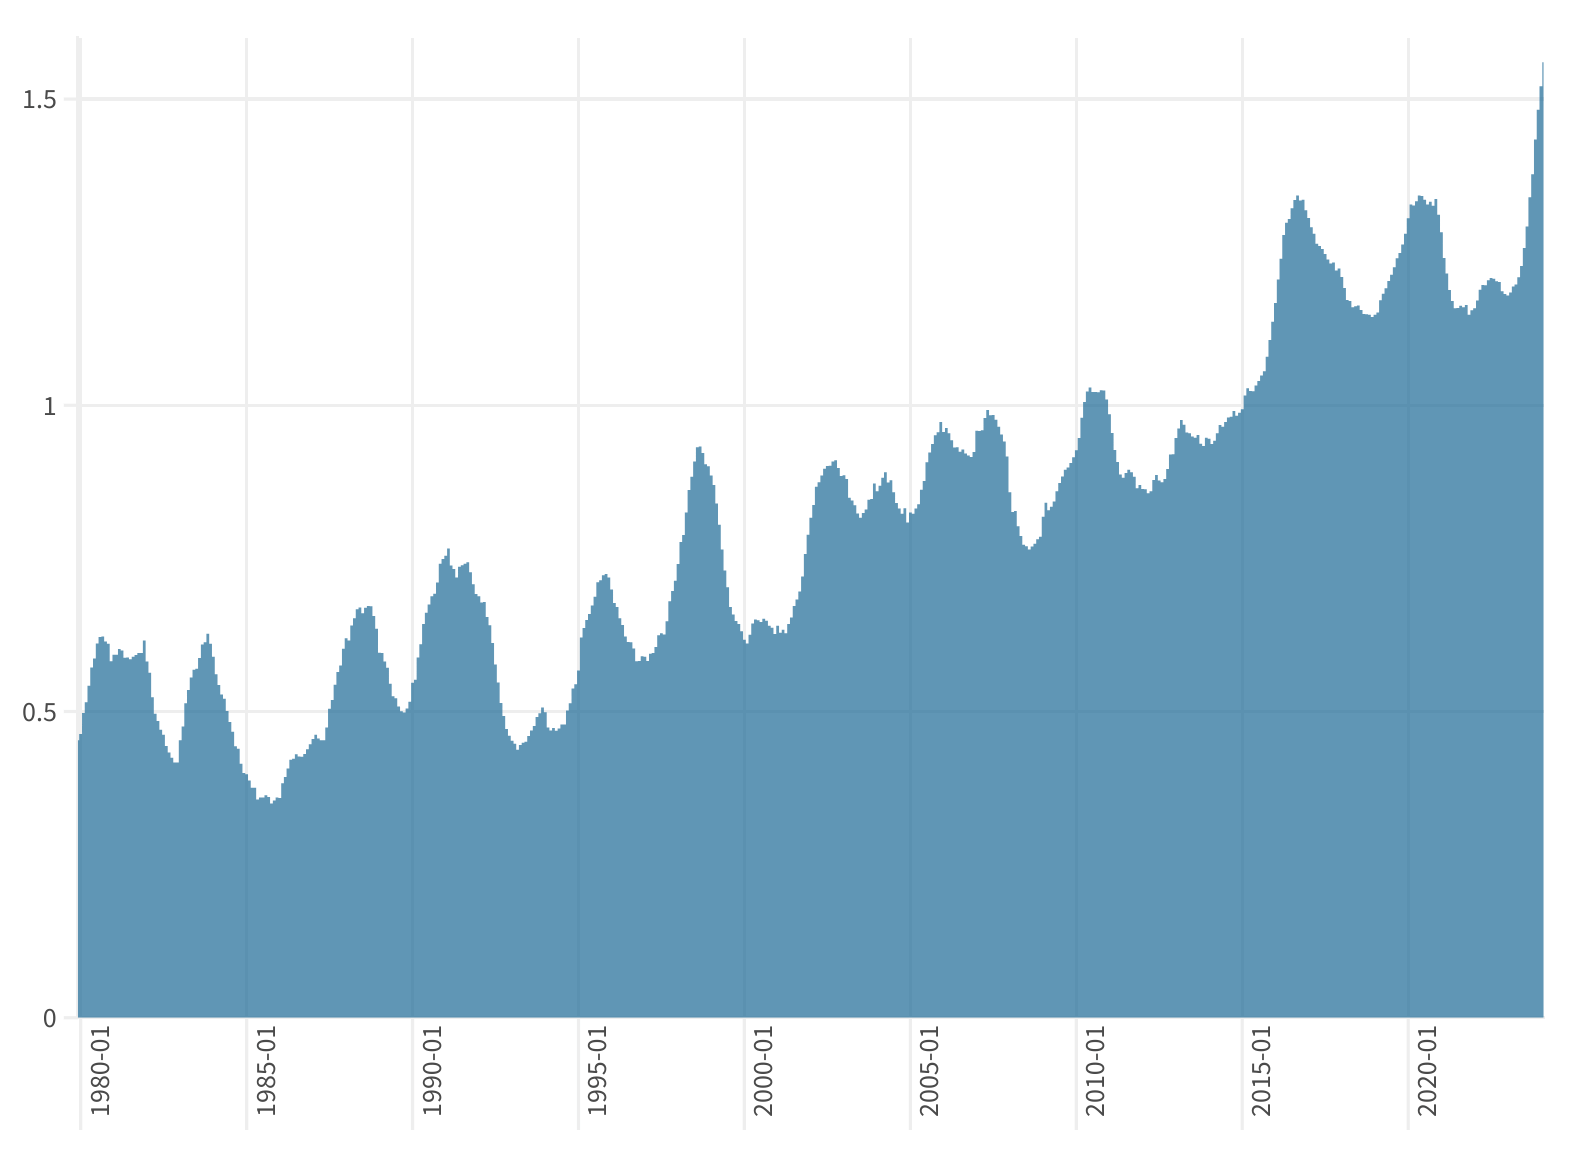 Area graph of the 12-month rolling average of degrees Celsius above 1850-1900 pre-industrial average showing an ever increasing trend now reaching above 1.5 degrees celsius